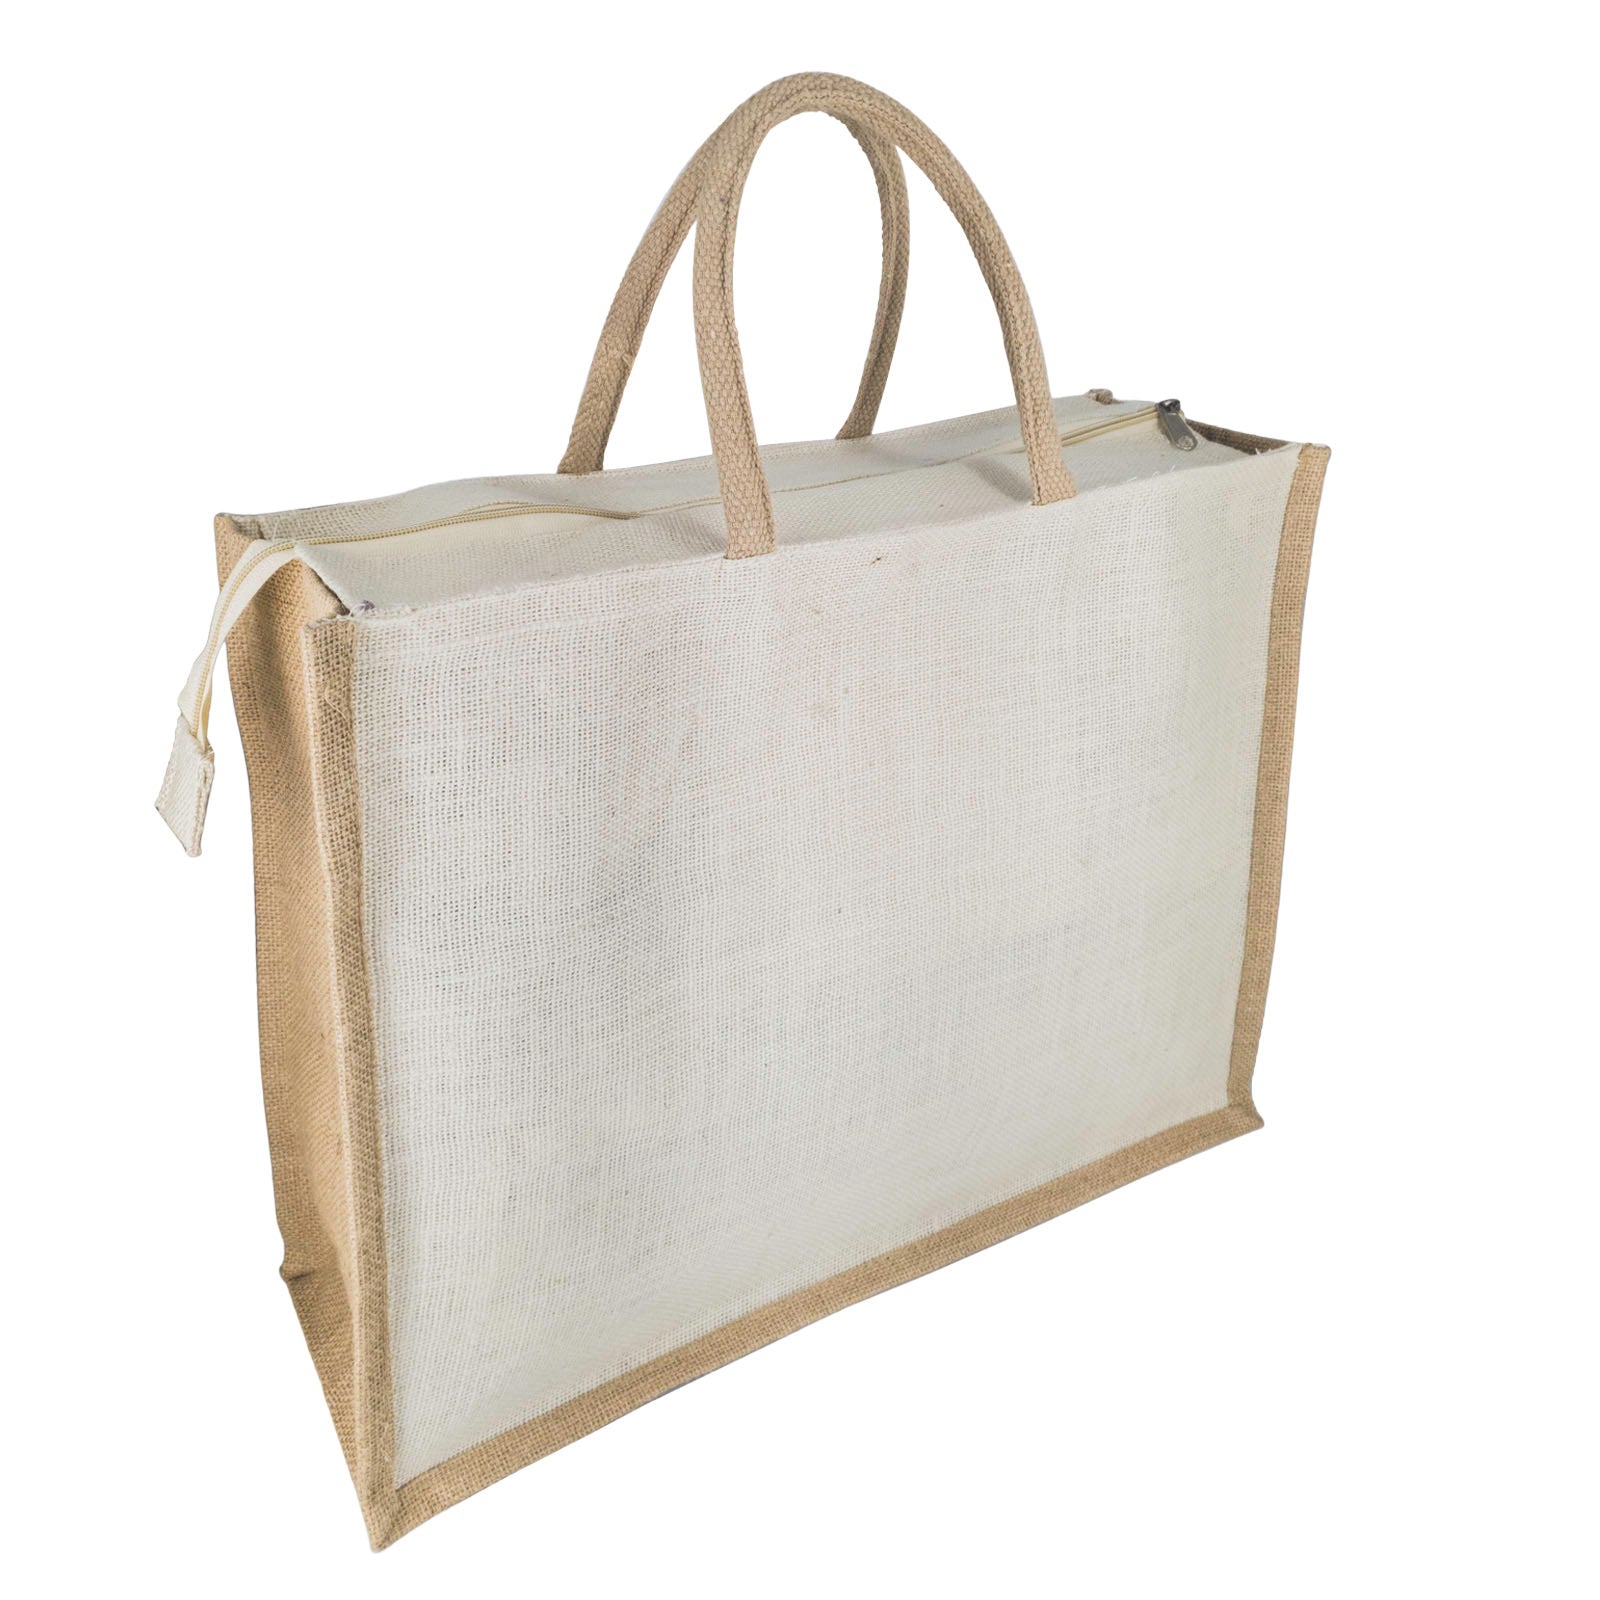 White Jute Bag with Brown Border and Zipper